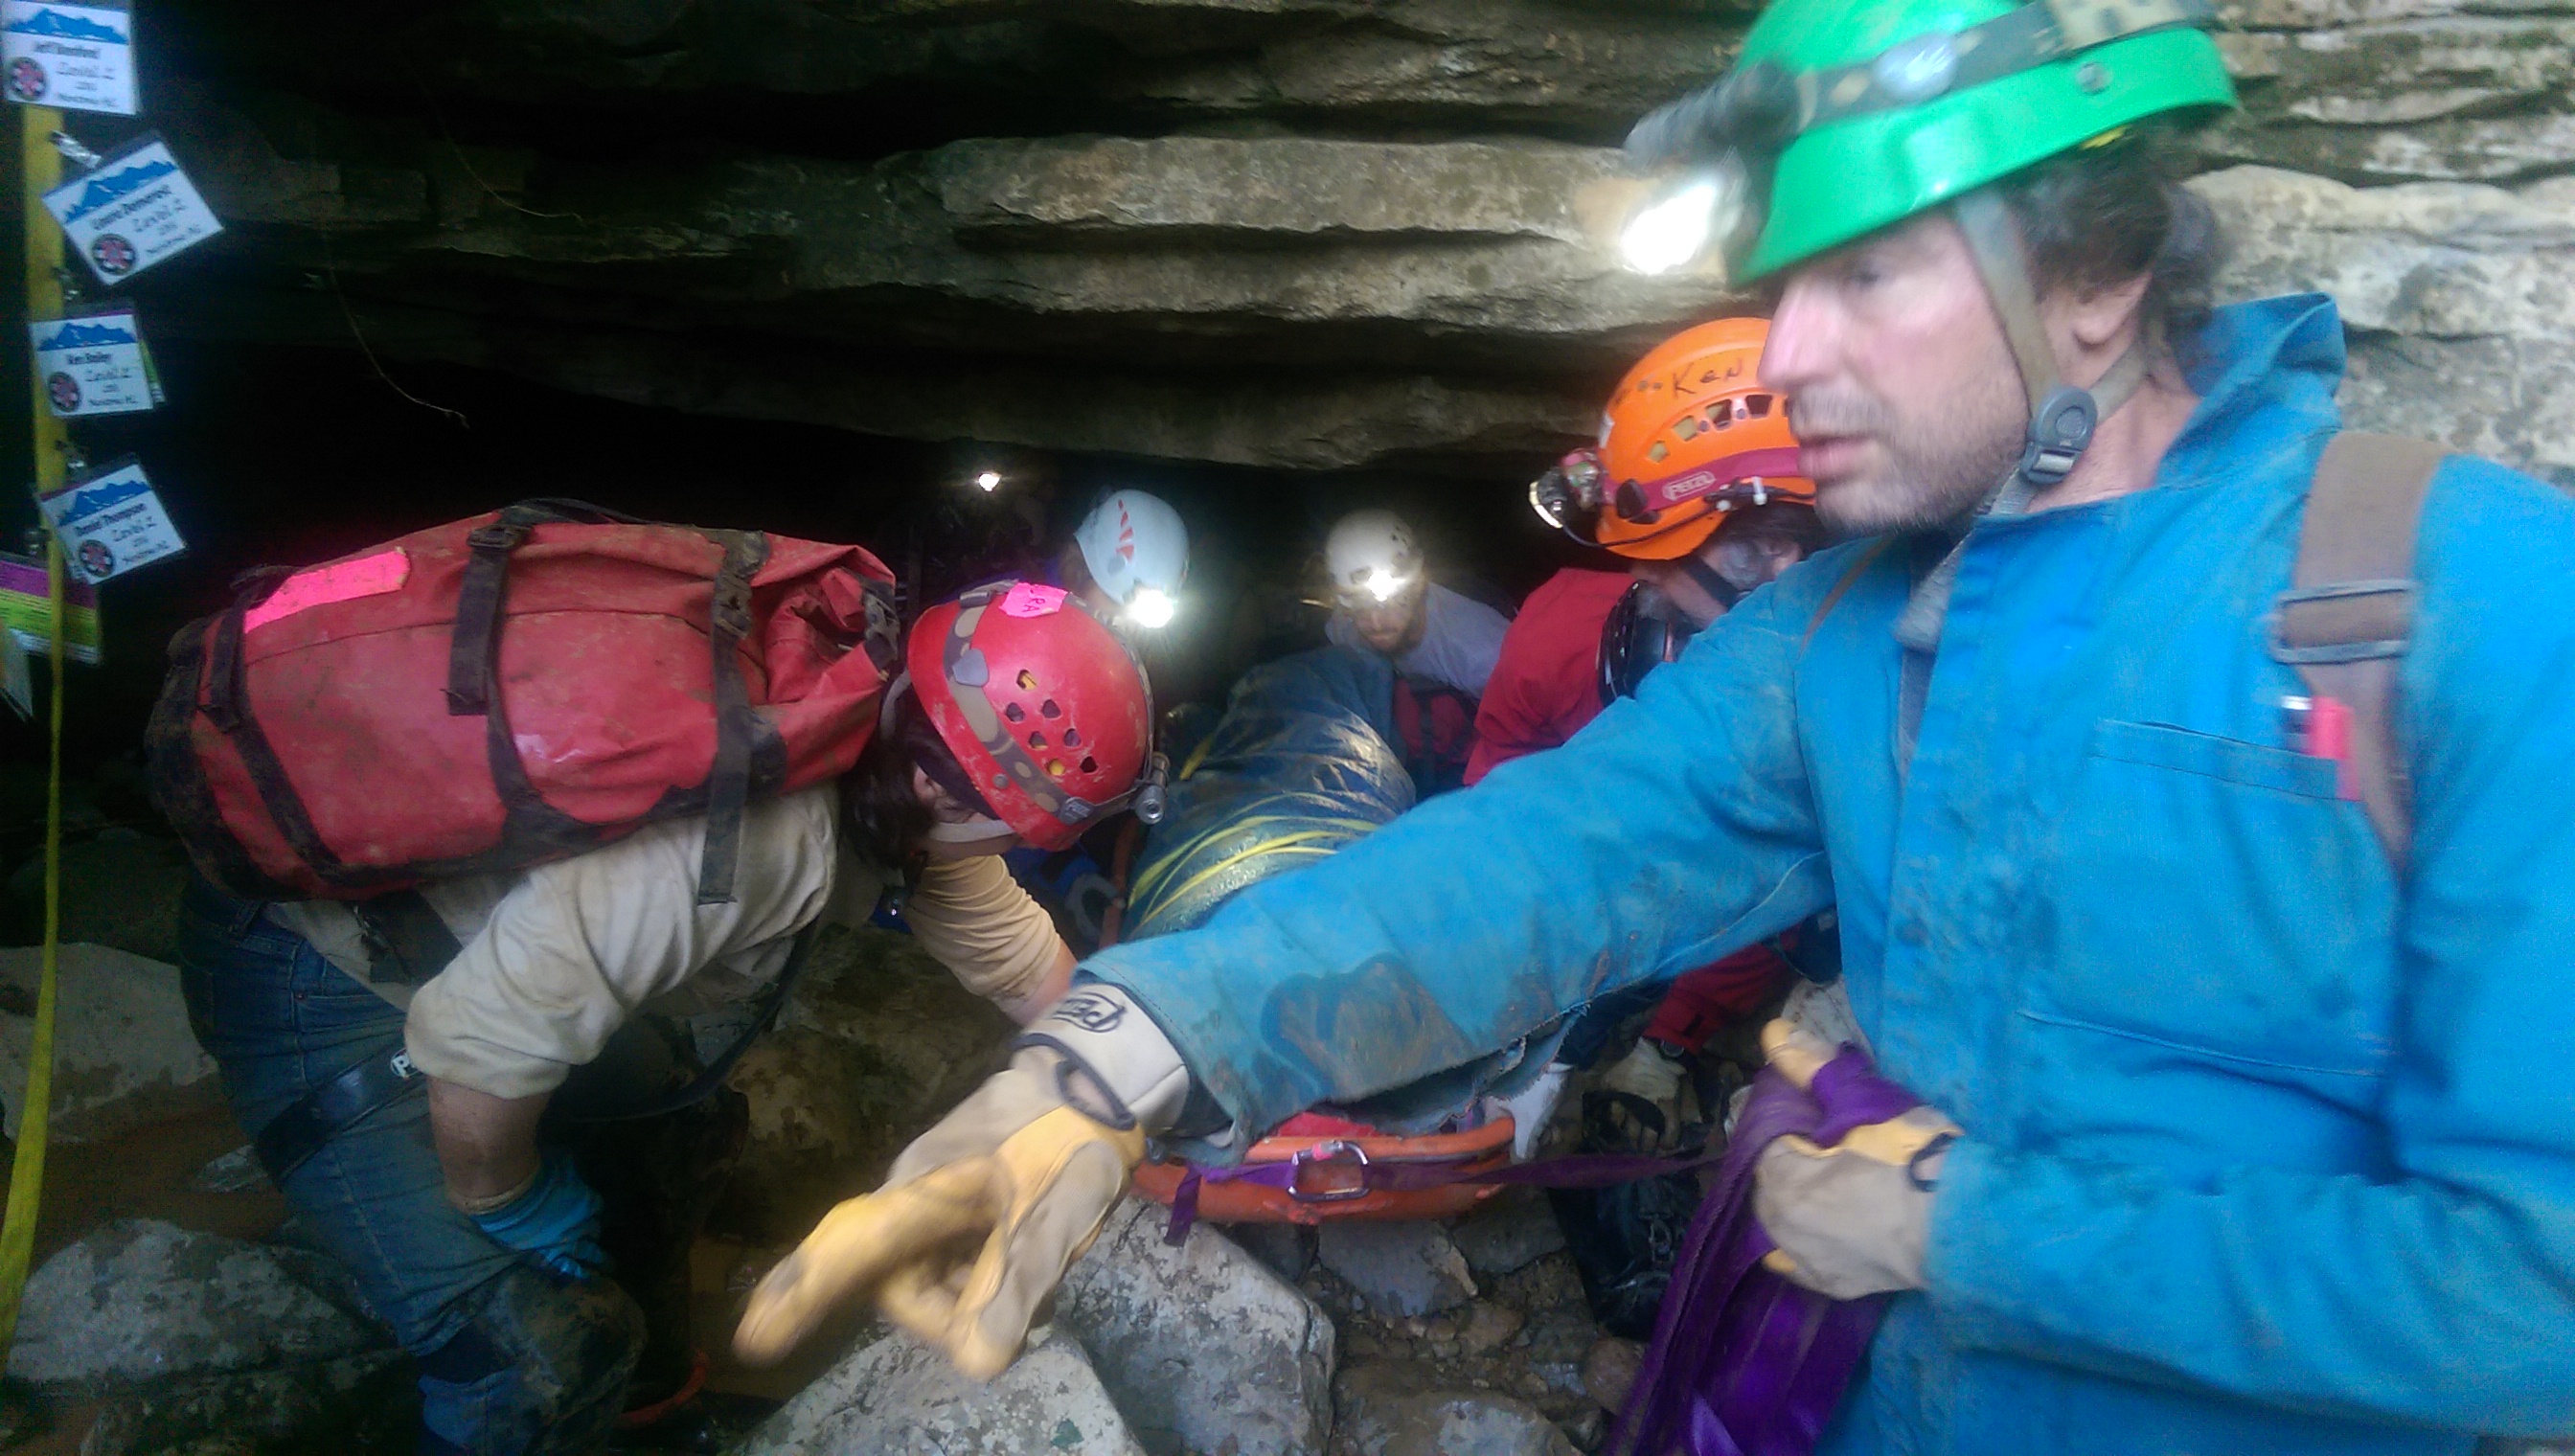 Just as in mountain rescue, cave rescue entails lots of pointing